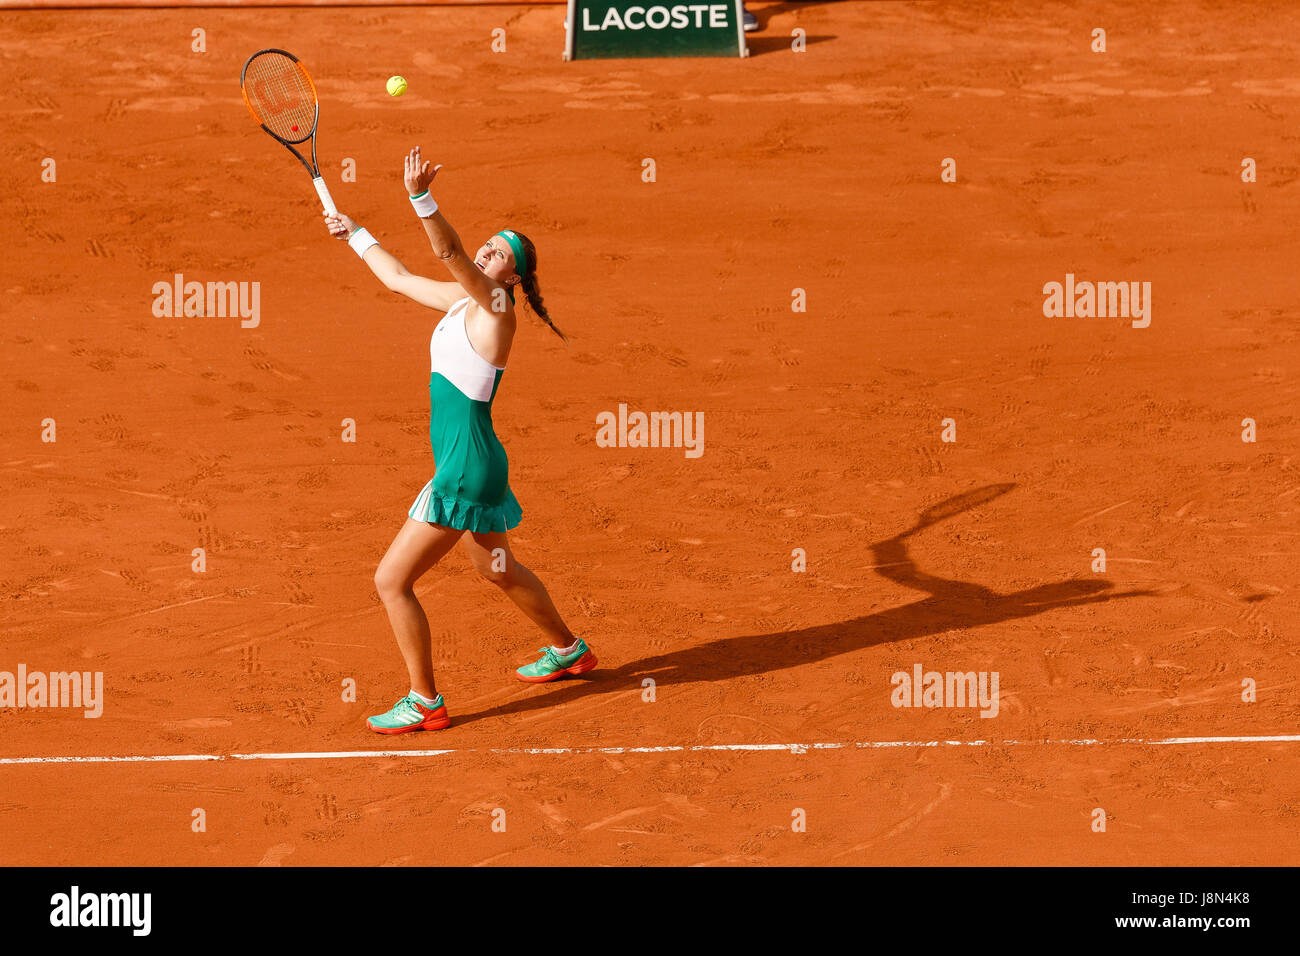 Paris, France, 29th May 2017, Tennis French Open: French player Kiki Mladenovic during her first round match at the 2017 Tennis French Open in Roland Garros Paris. Credit: Frank Molter/Alamy Live News Stock Photo